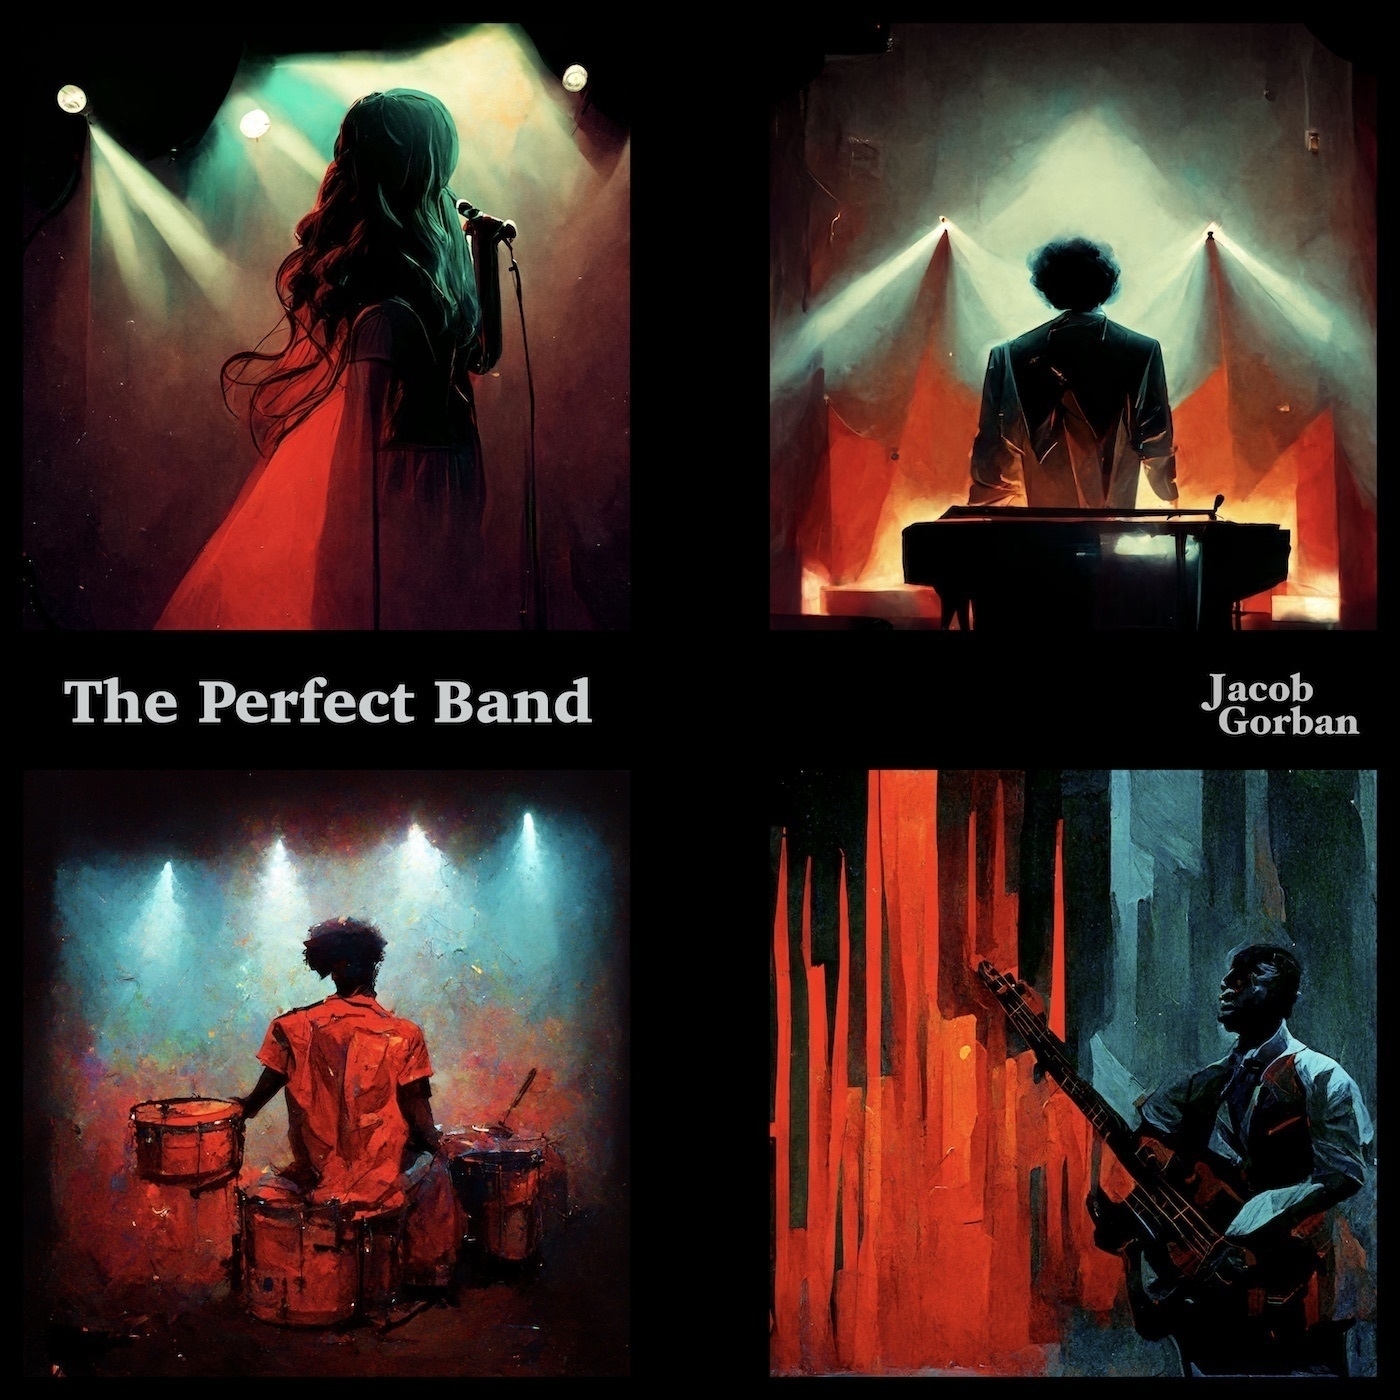 The Perfect Band by Jacob Gorban